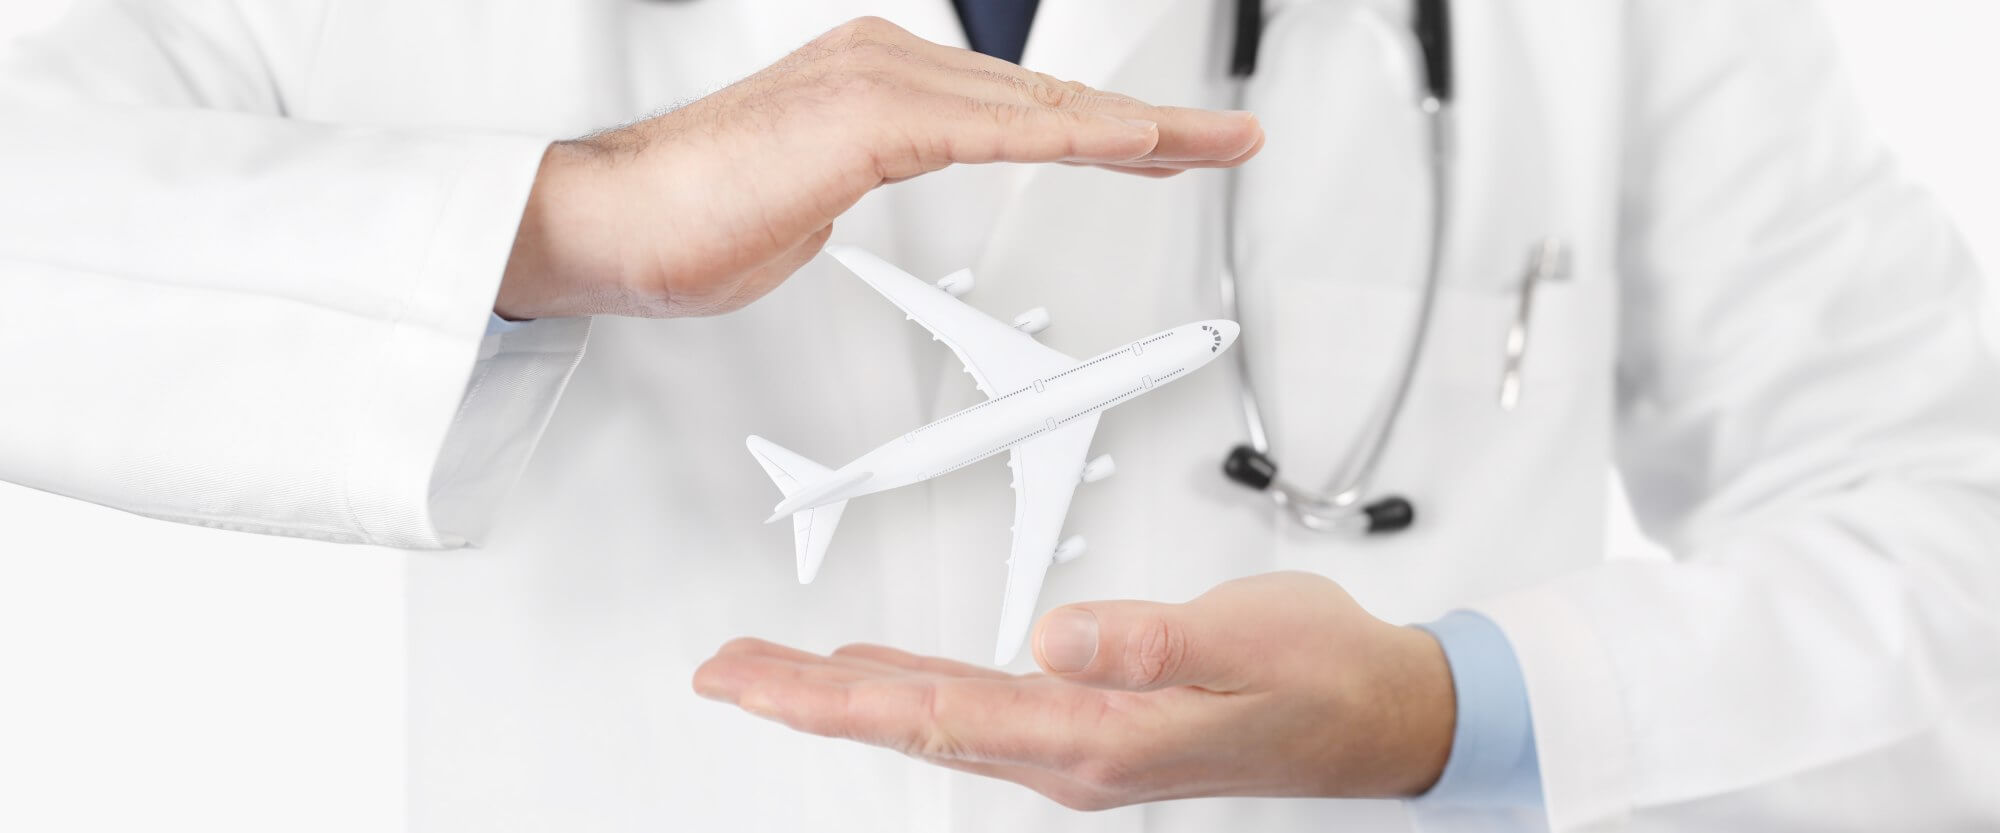 Medical tourism: mainstream surgeries and manipulations